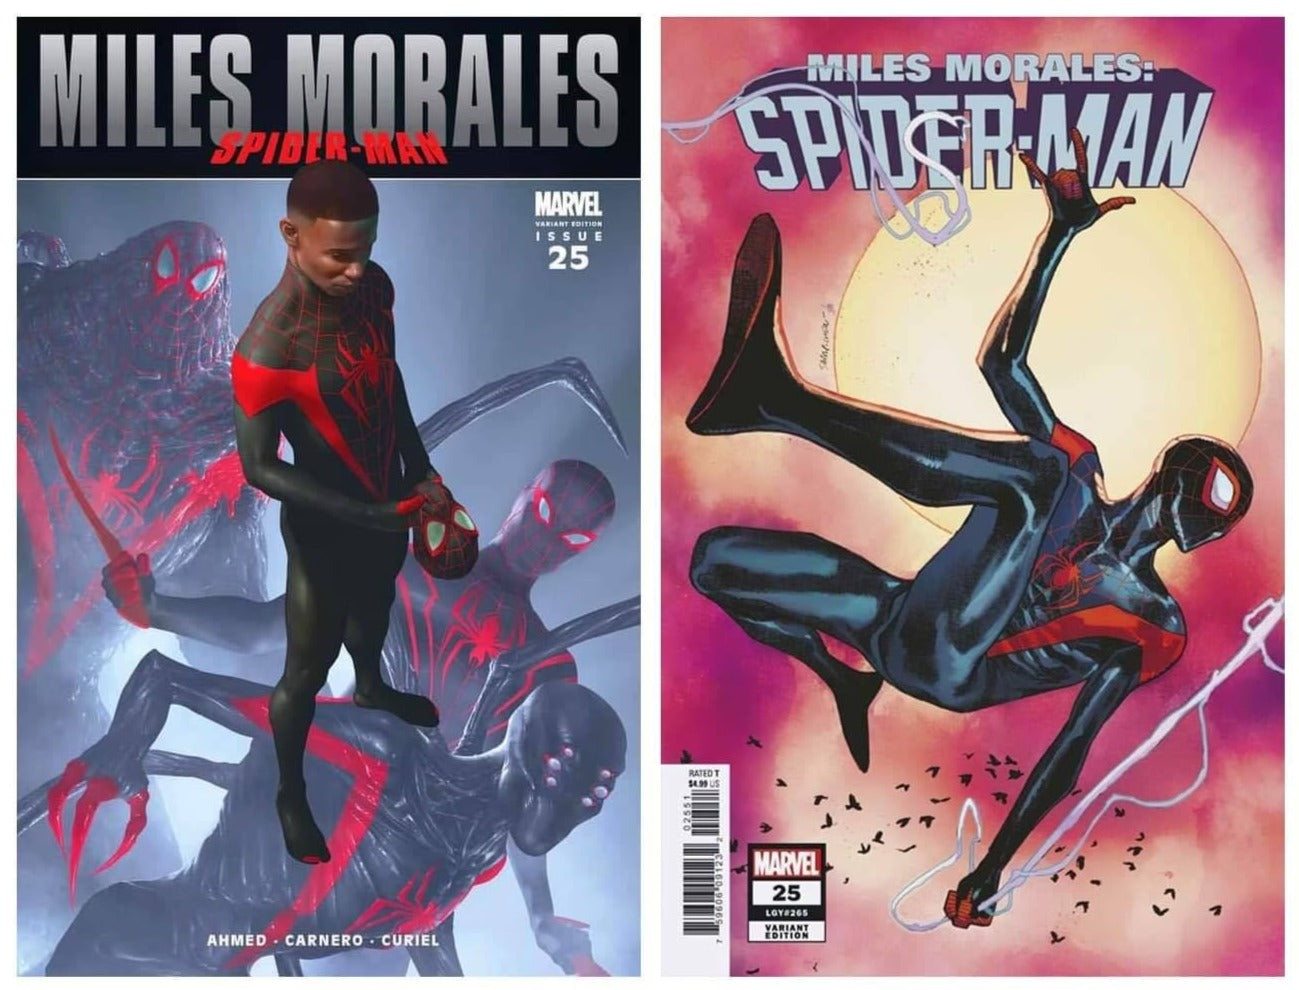 MILES MORALES #25 RAHZZAH ULTIMATE FALLOUT #4 TRUE HOMAGE VARIANT LIMITED TO 1500 COPIES & 1:25 PICHELLI VARIANT